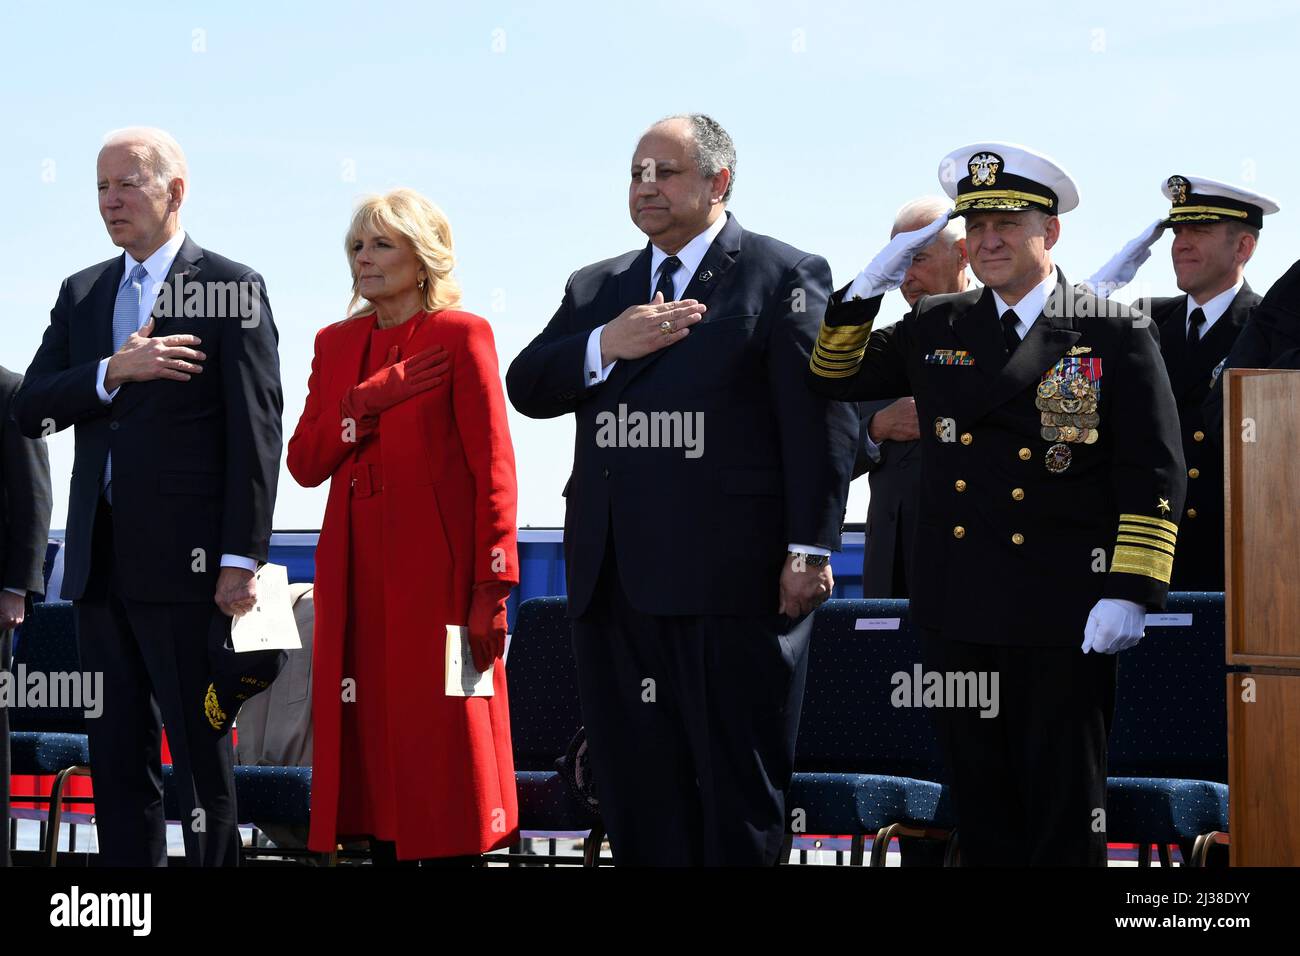 Wilmington, United States of America. 02 April, 2022. U.S President Joe Biden stands for the national anthem during the commissioning commemoration ceremony for the Virginia-class attack submarine USS Delaware, April 2, 2022 in Wilmington, Delaware. Standing from left to right are: President Joe Biden, First Lady Jill Biden, Navy Secretary Carlos Del Toro, and CNO Adm. Mike Gilday. Credit: CPO Joshua Karsten/US Navy/Alamy Live News Stock Photo